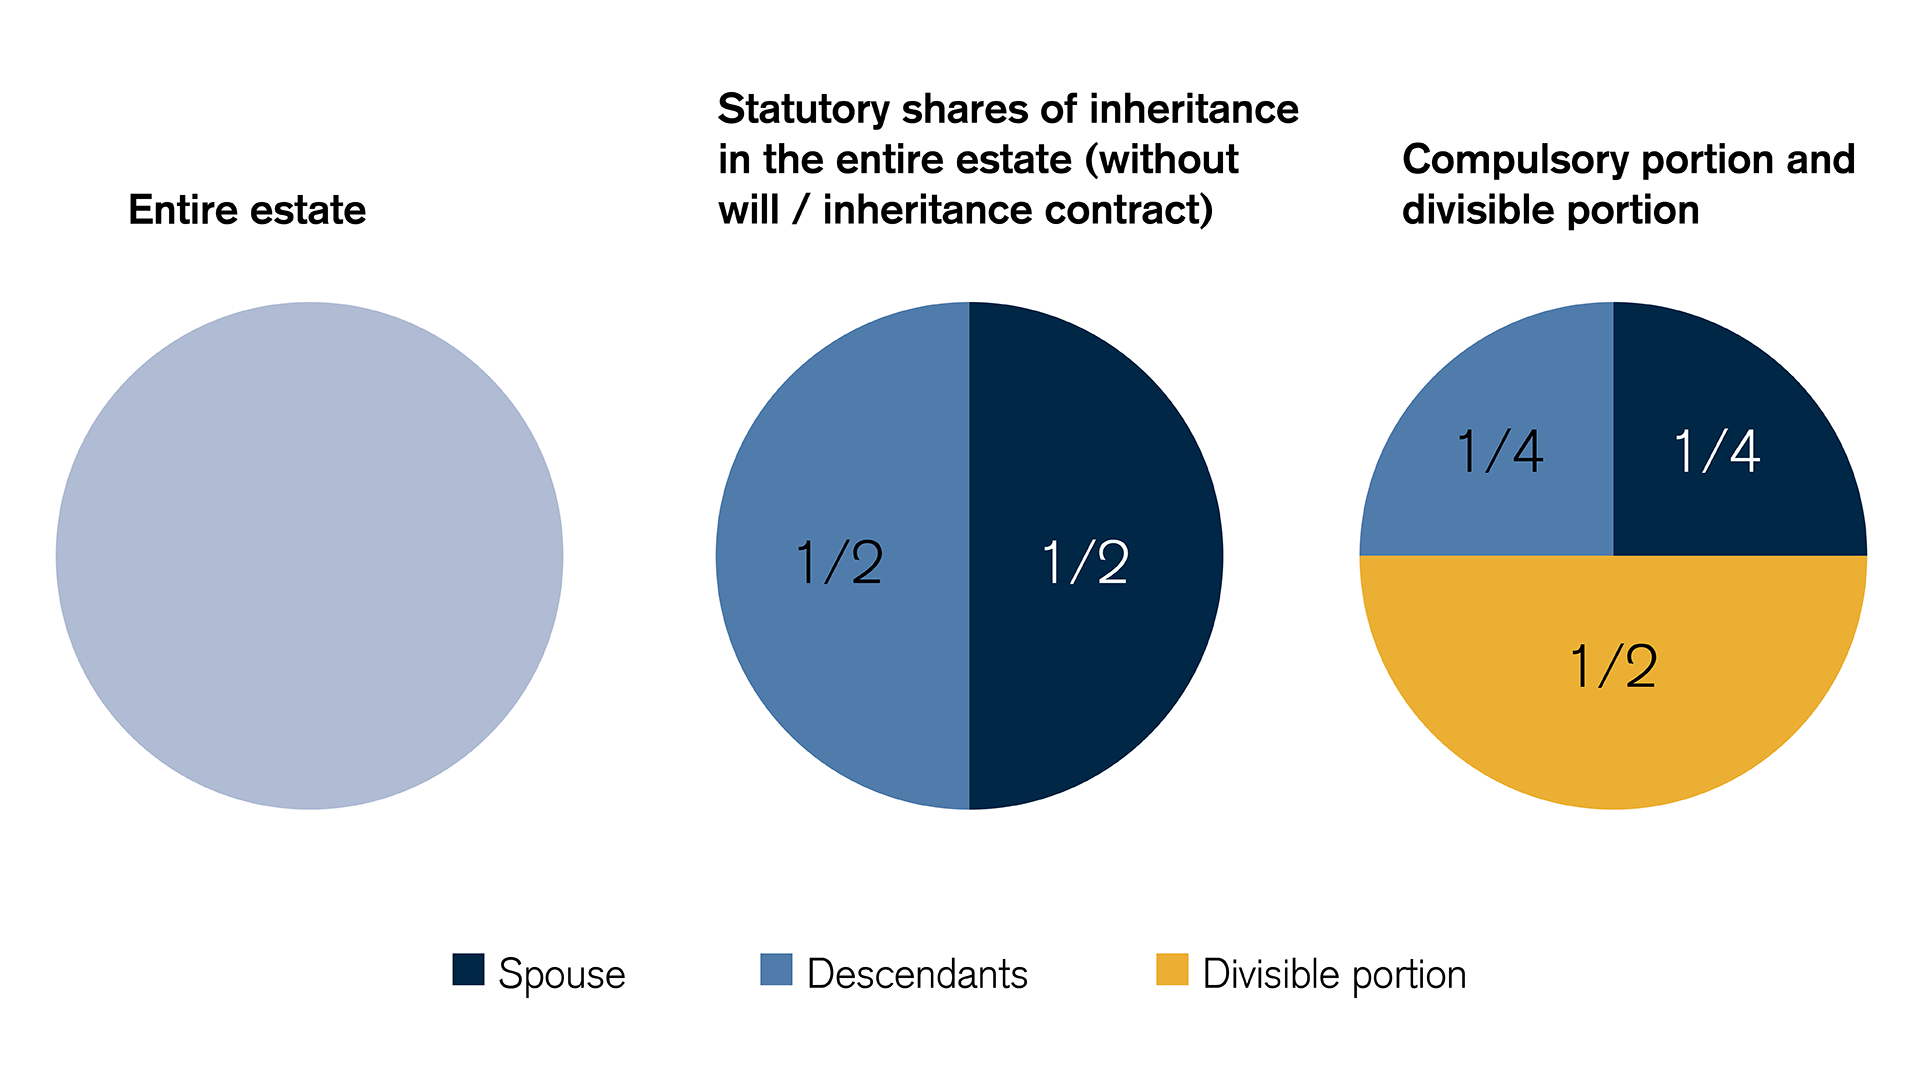 Breakdown of estate into compulsory portion and divisible portion